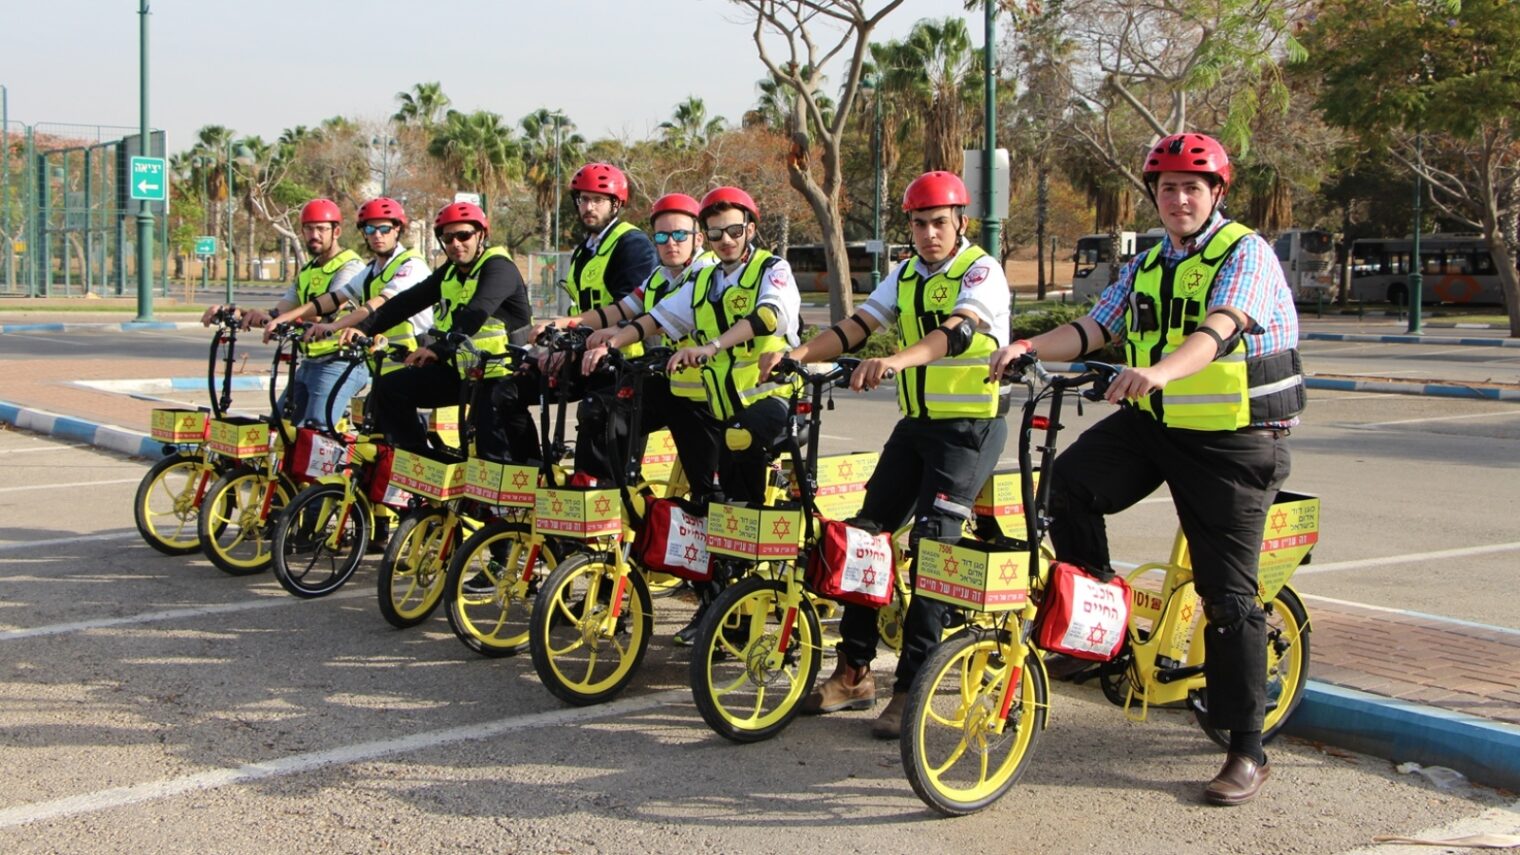 Life Riders volunteers get fully equipped electric bikes to handle medical emergencies. Photo by Chezki Grossbard